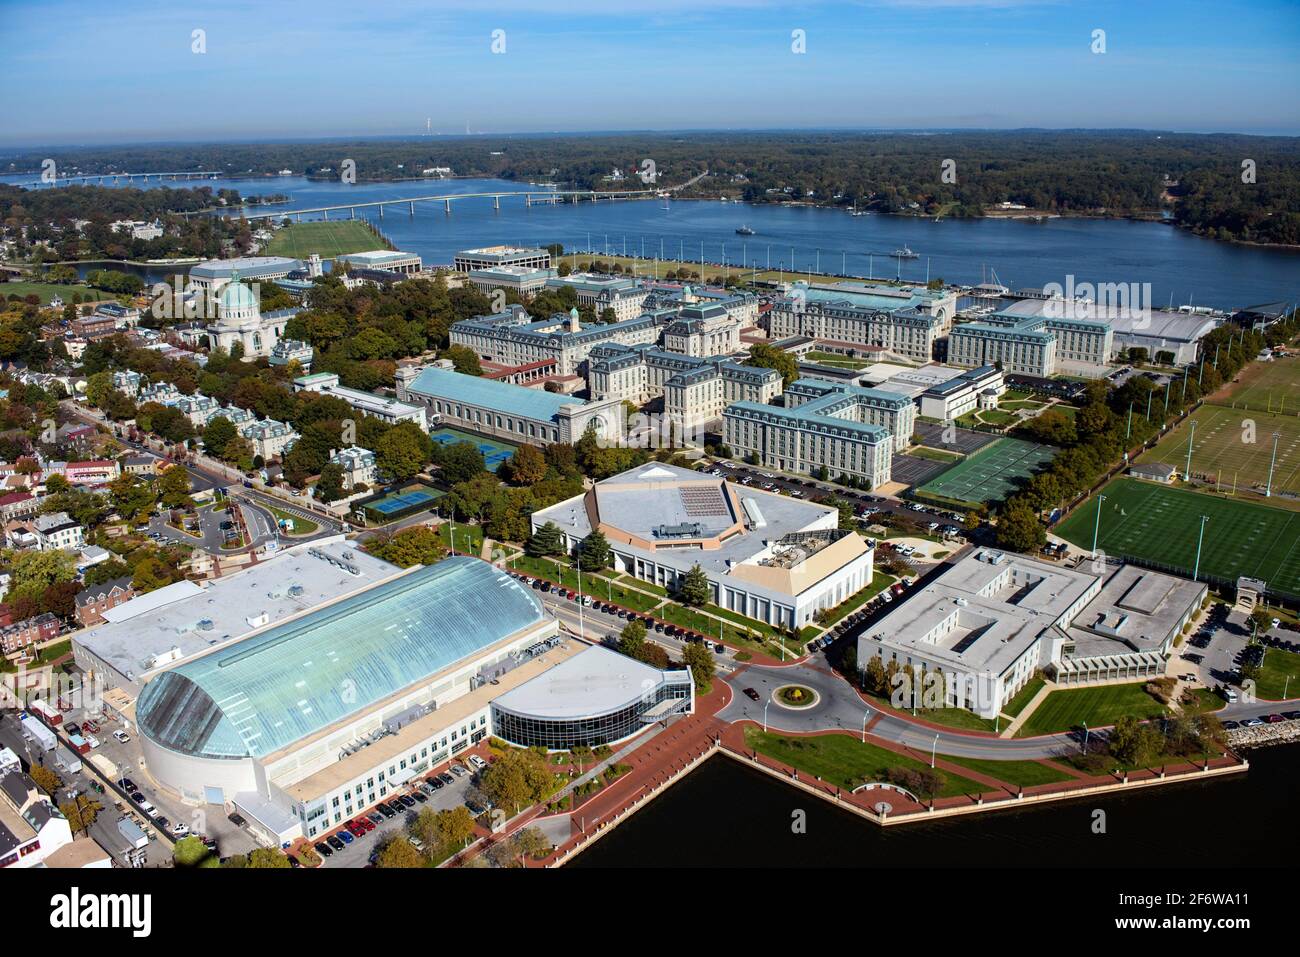 ANNAPOLIS, Md. (Oct. 21, 2015) A file photo of the U.S. Naval Academy taken Oct. 21, 2015. Stock Photo